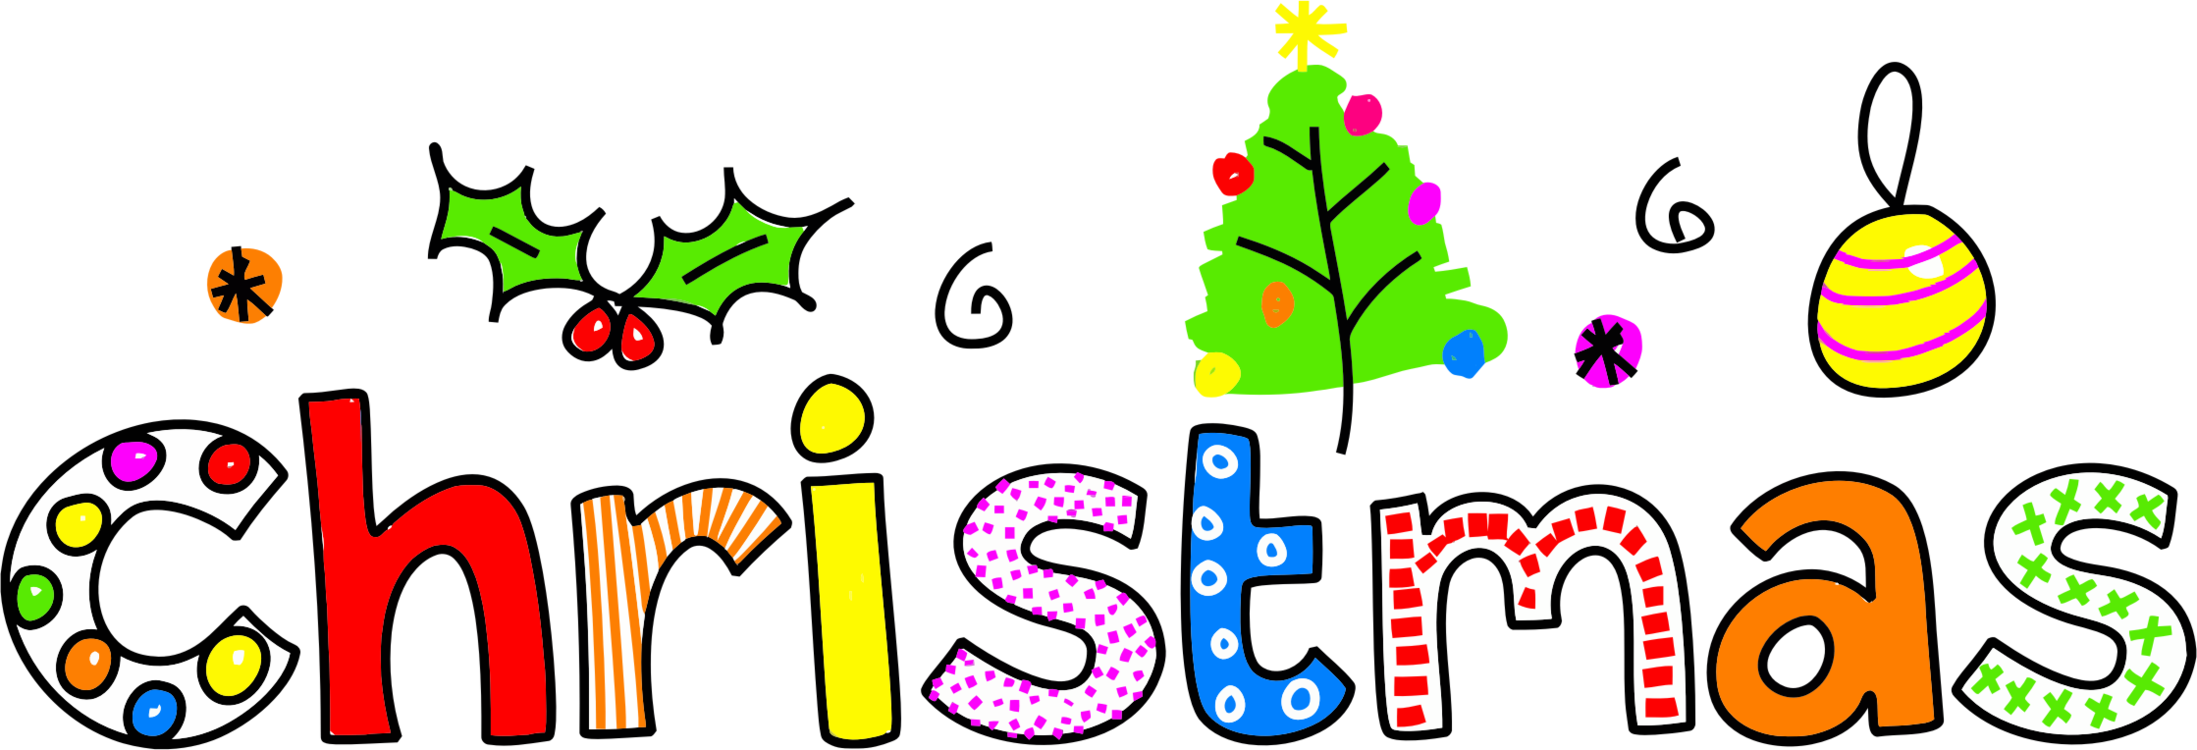 A Black Background With Colorful Letters And A Christmas Tree